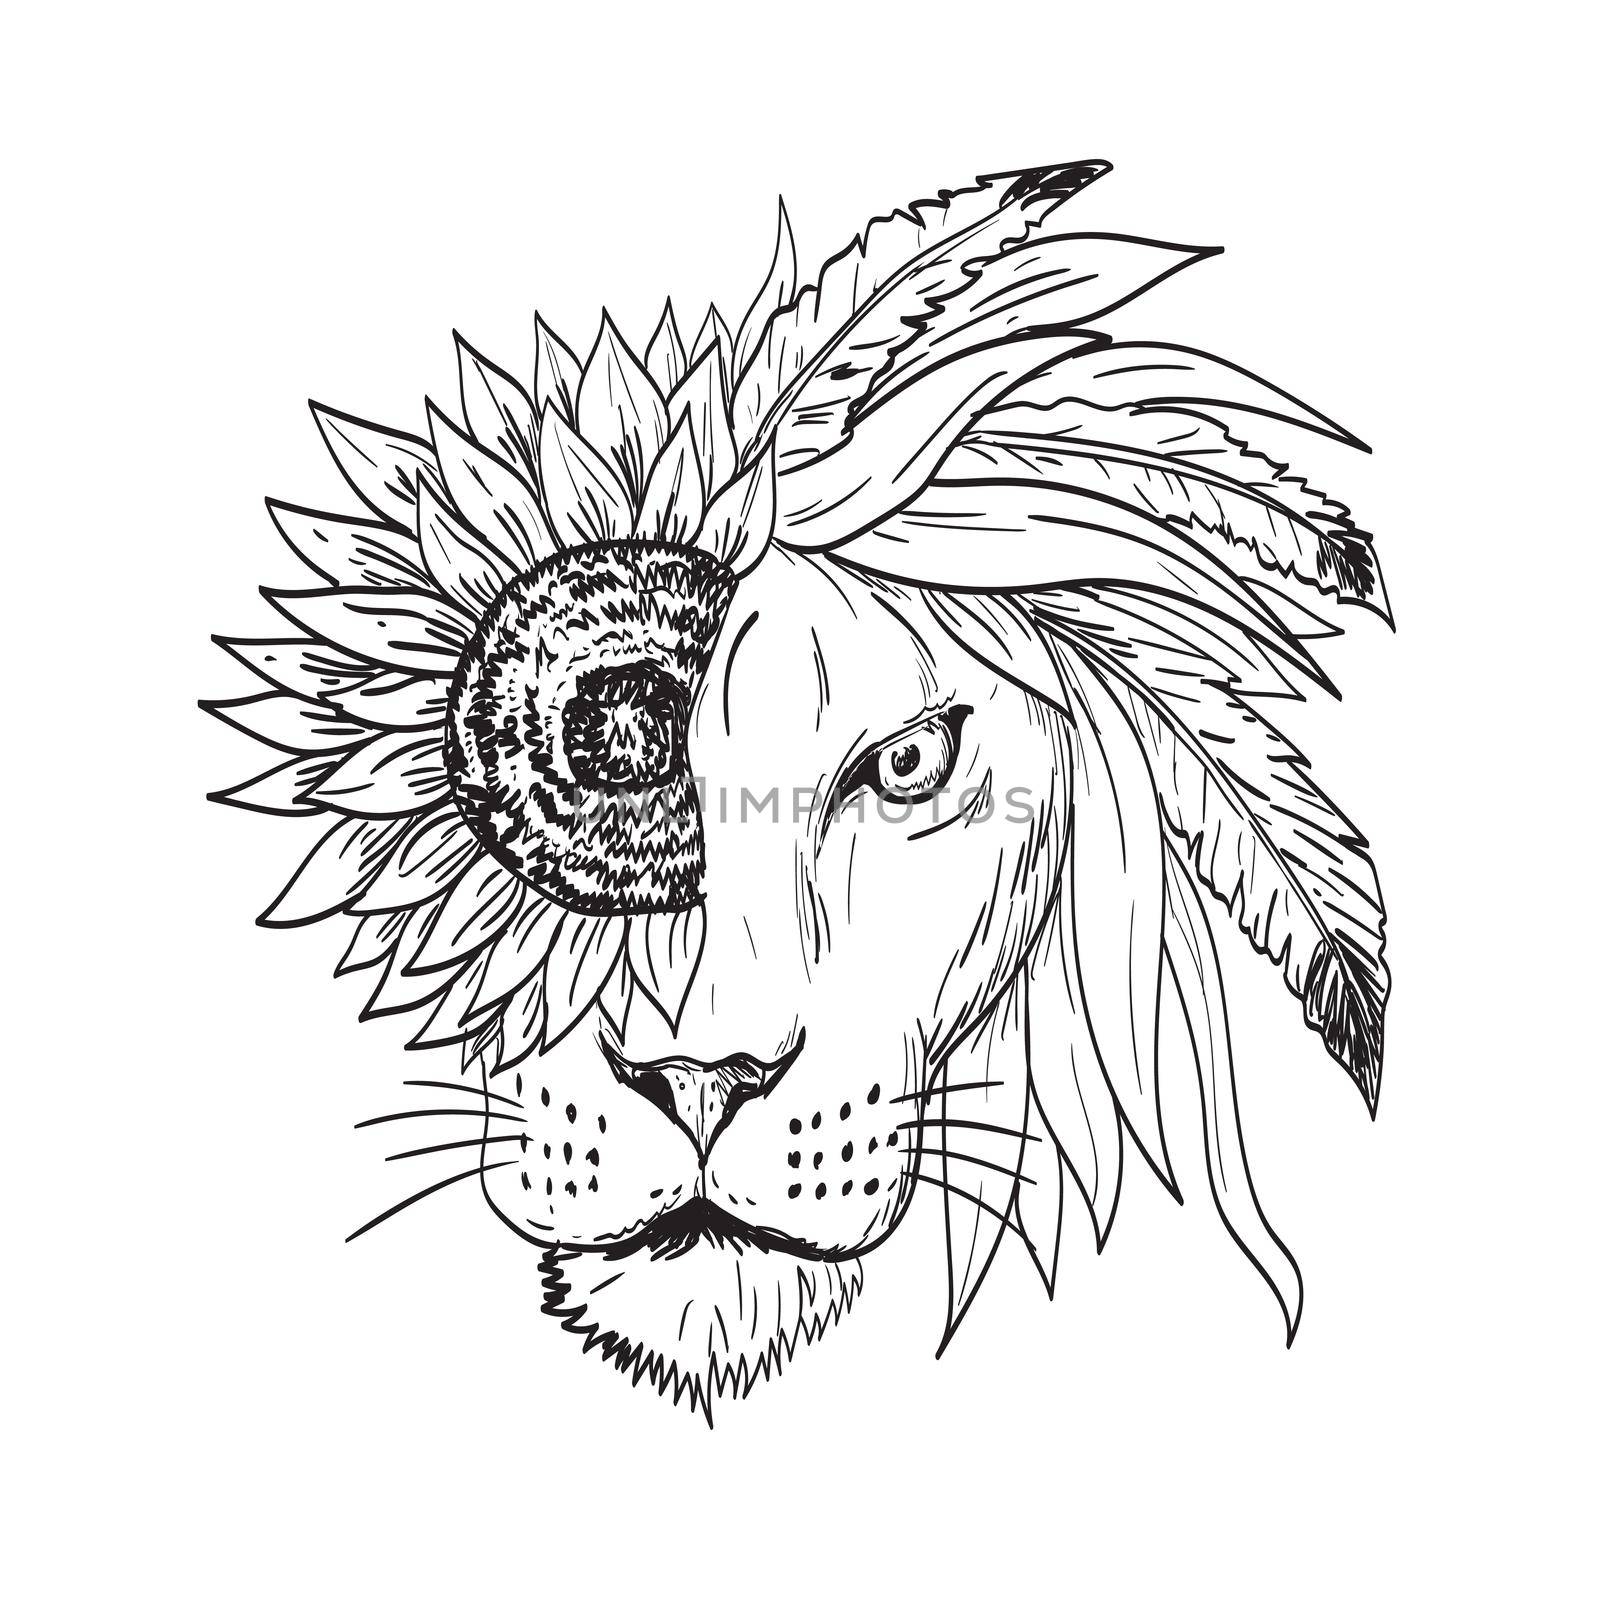 Drawing sketch style illustration of a lion with sunflower, Helianthus, feather and leaves as mane viewed from front on isolated background in black and white tattoo style.
